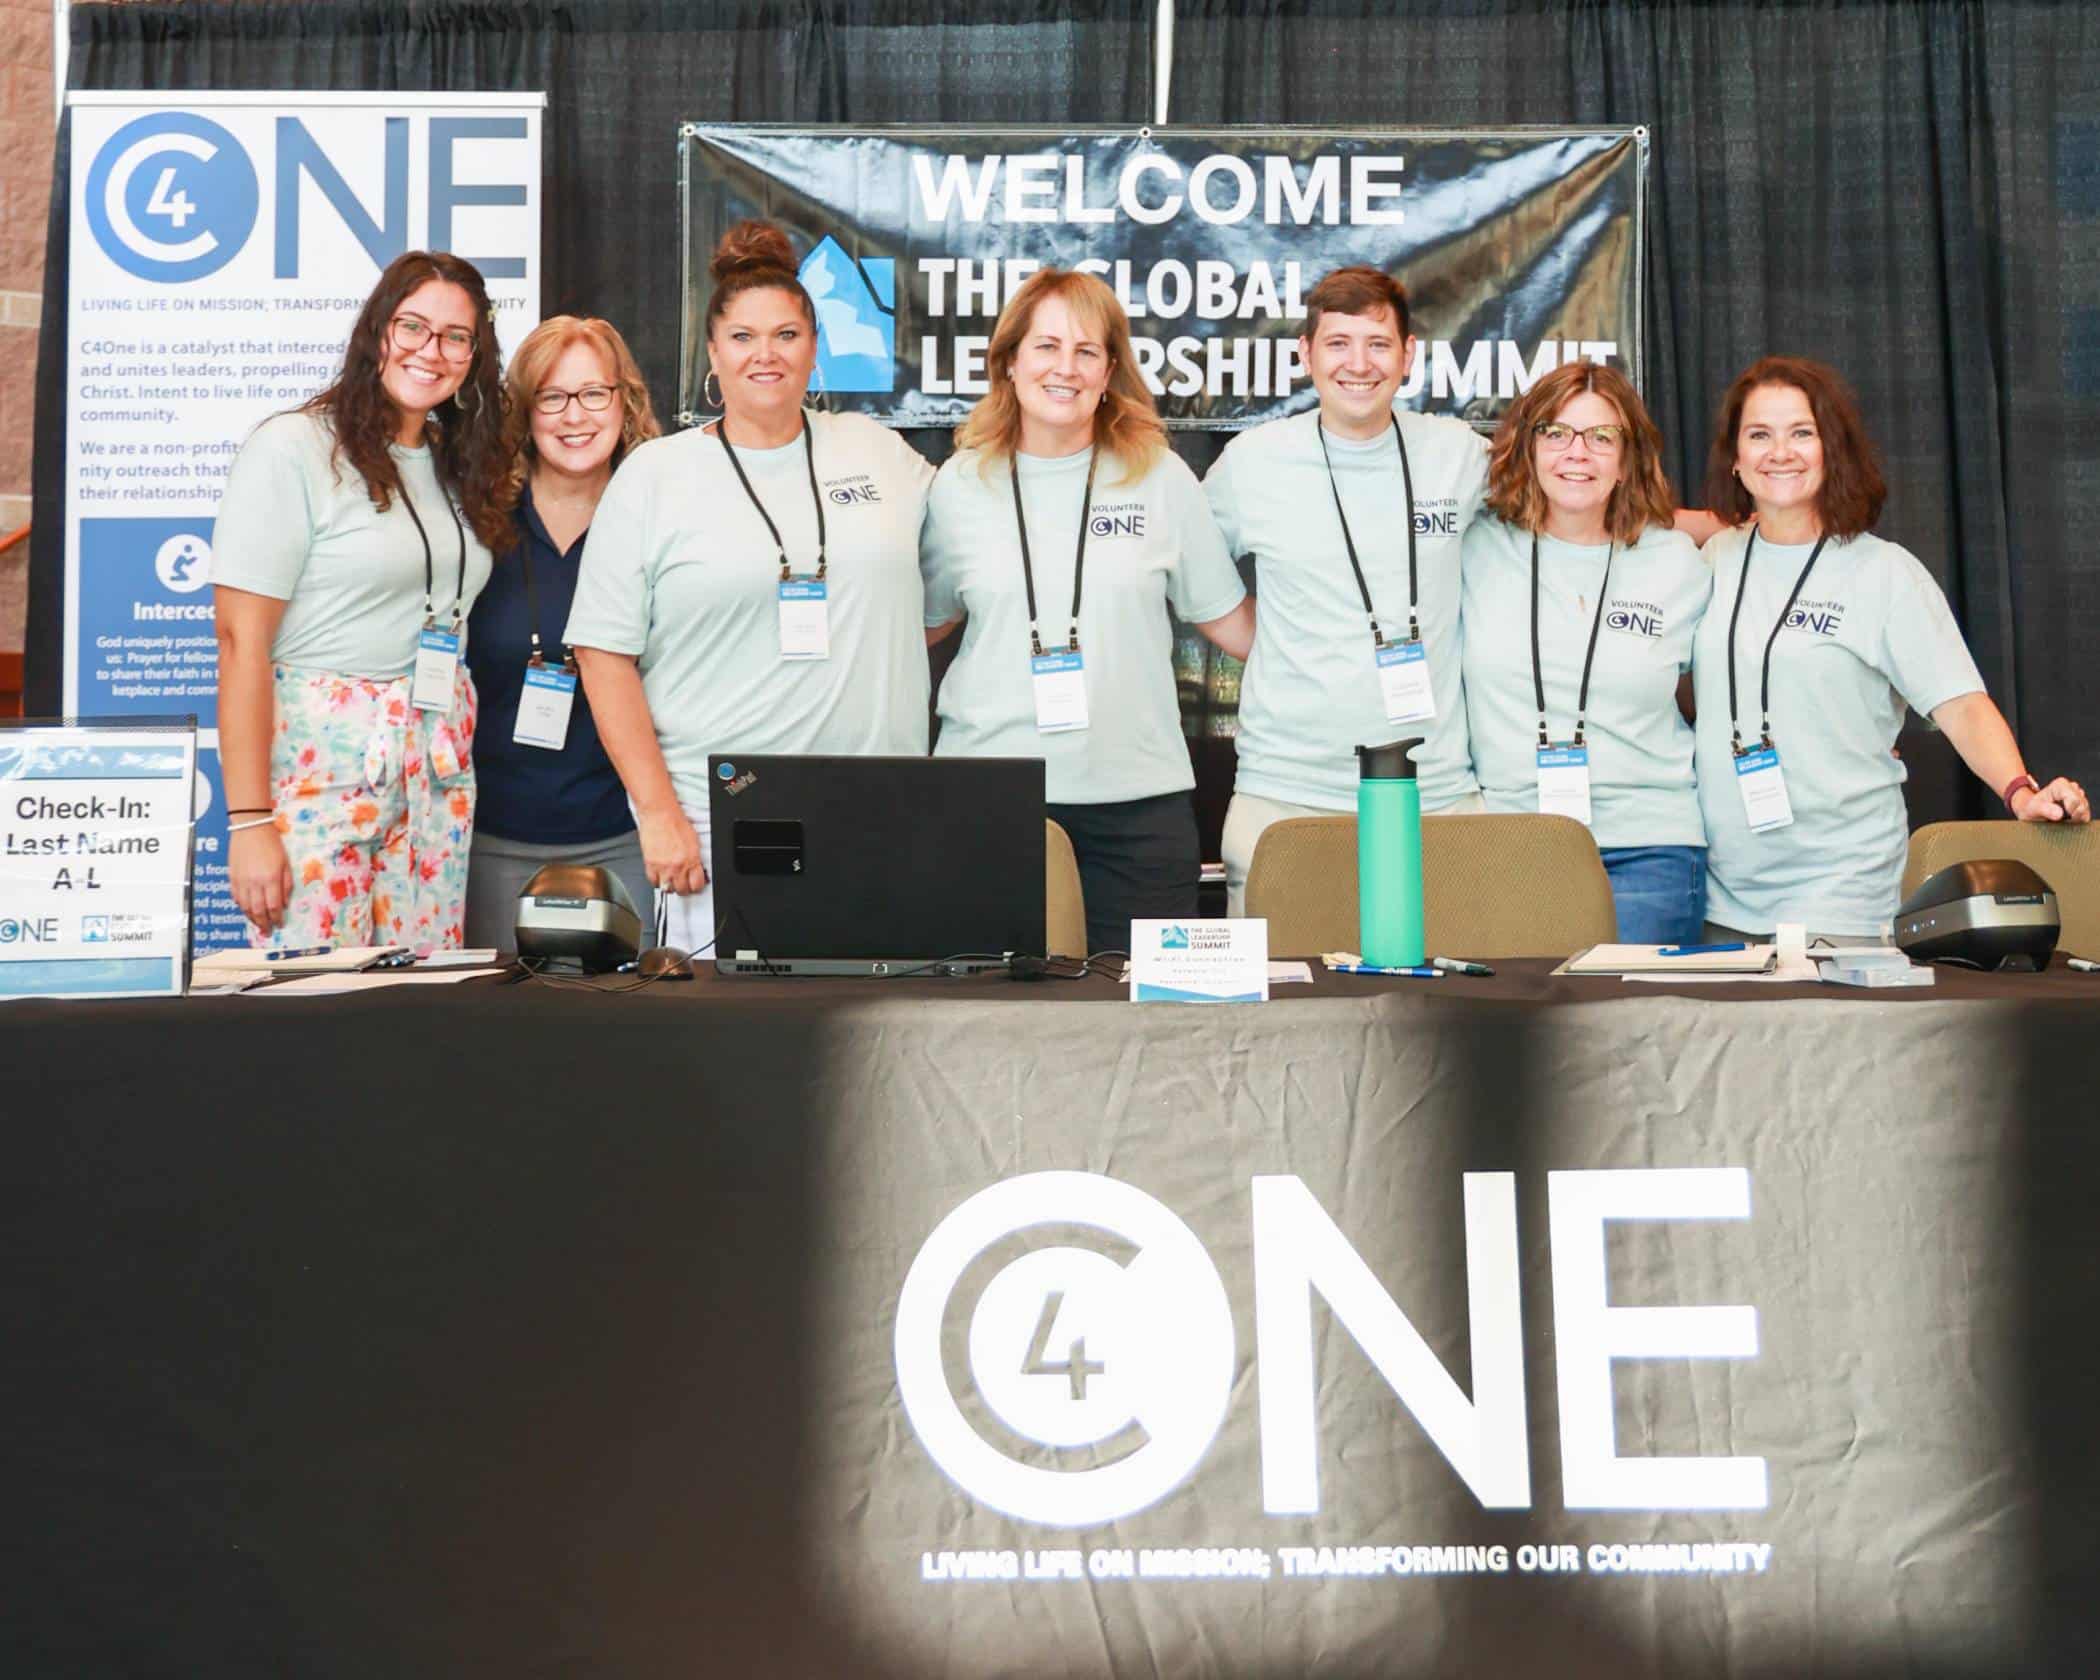 C4One staff standing behind the vendor table at the Global Leadership Summit 2023